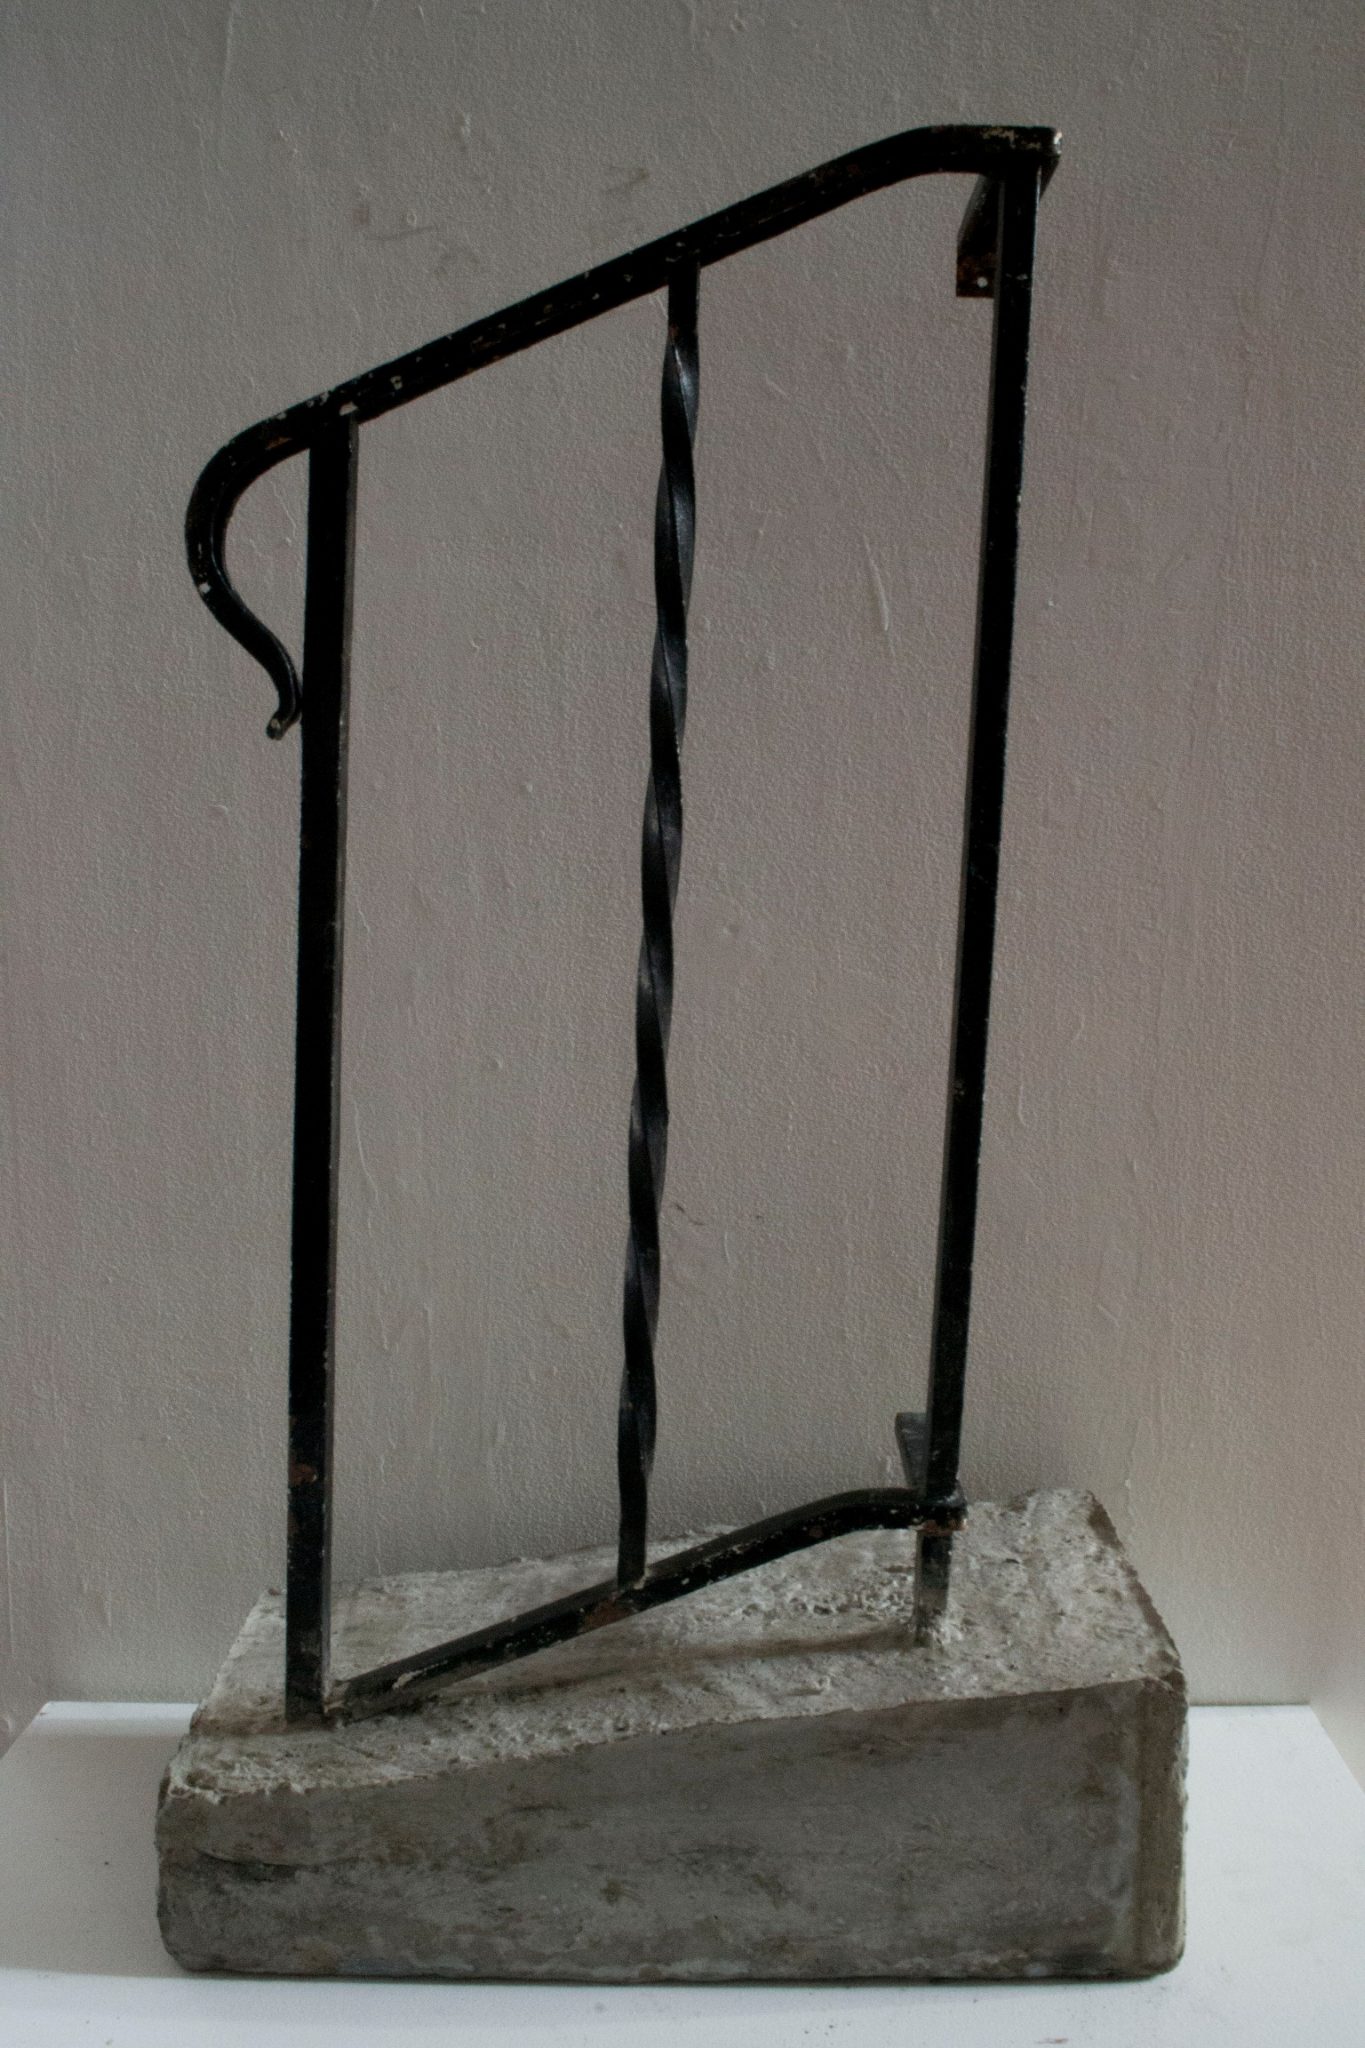 A photo of art from "Age Ingrained" showing a black handrailing on concrete